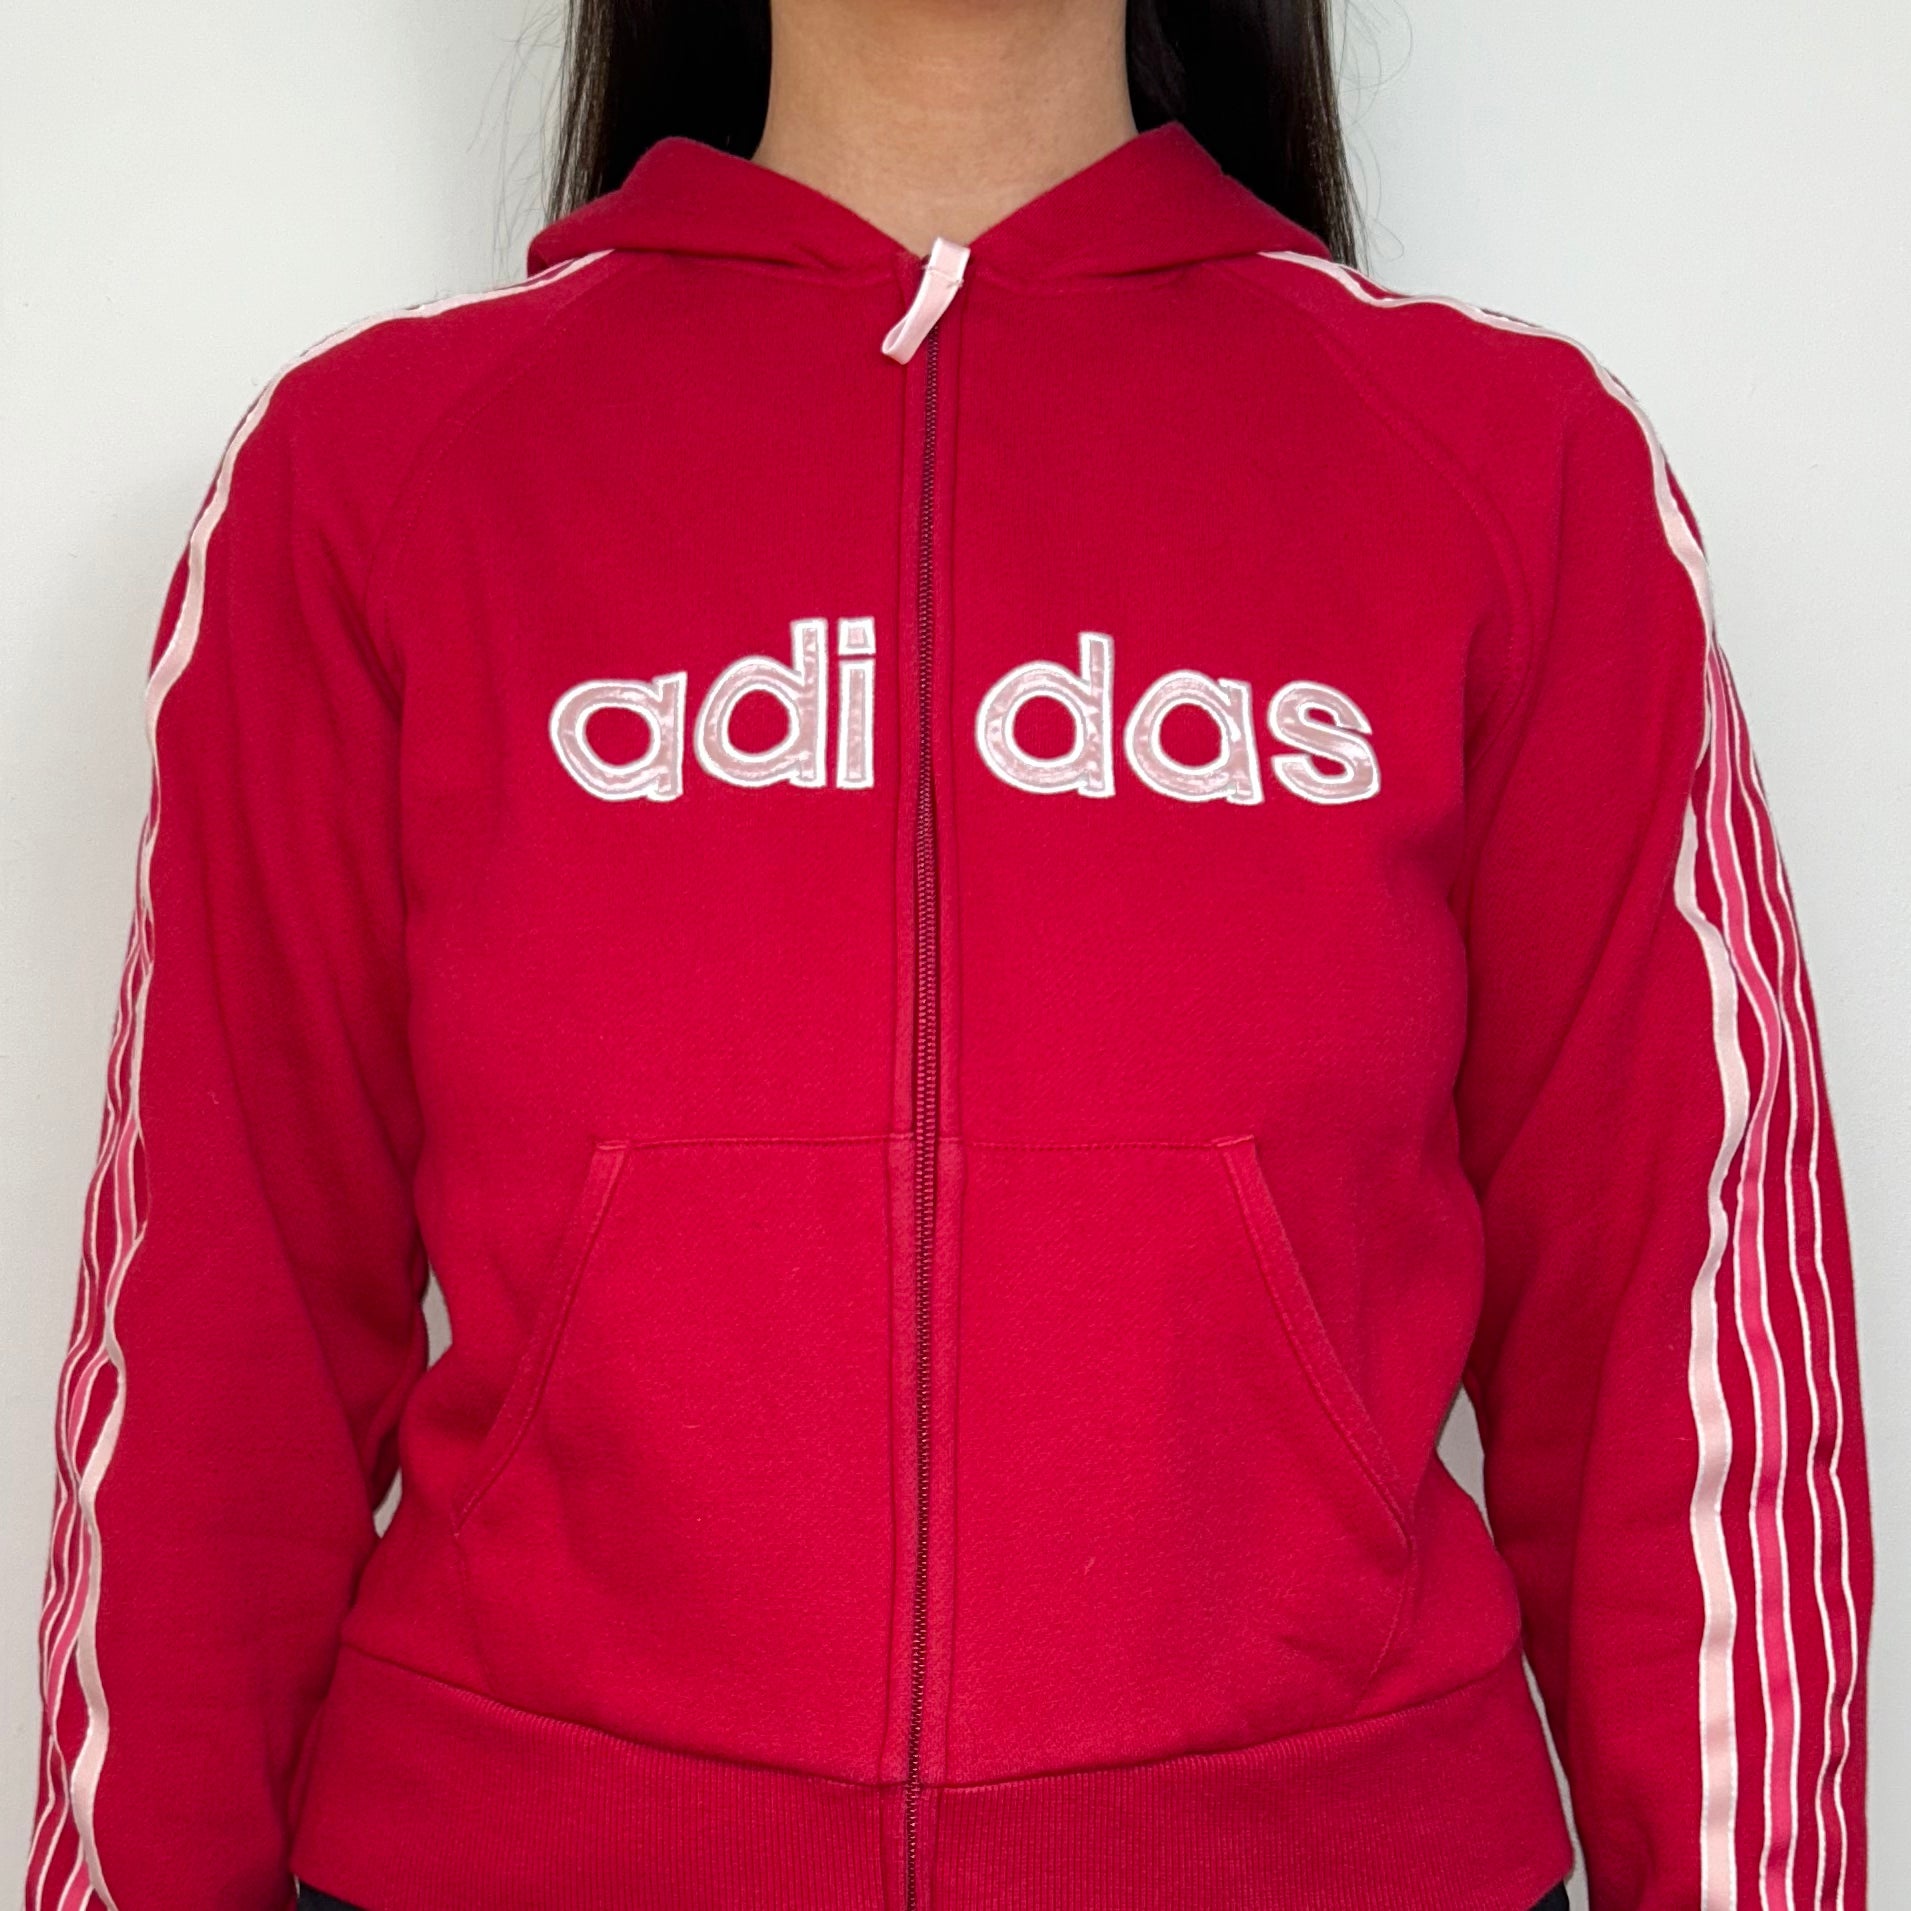 close up of red zip up hoodie with big adidas text logo shown on a model